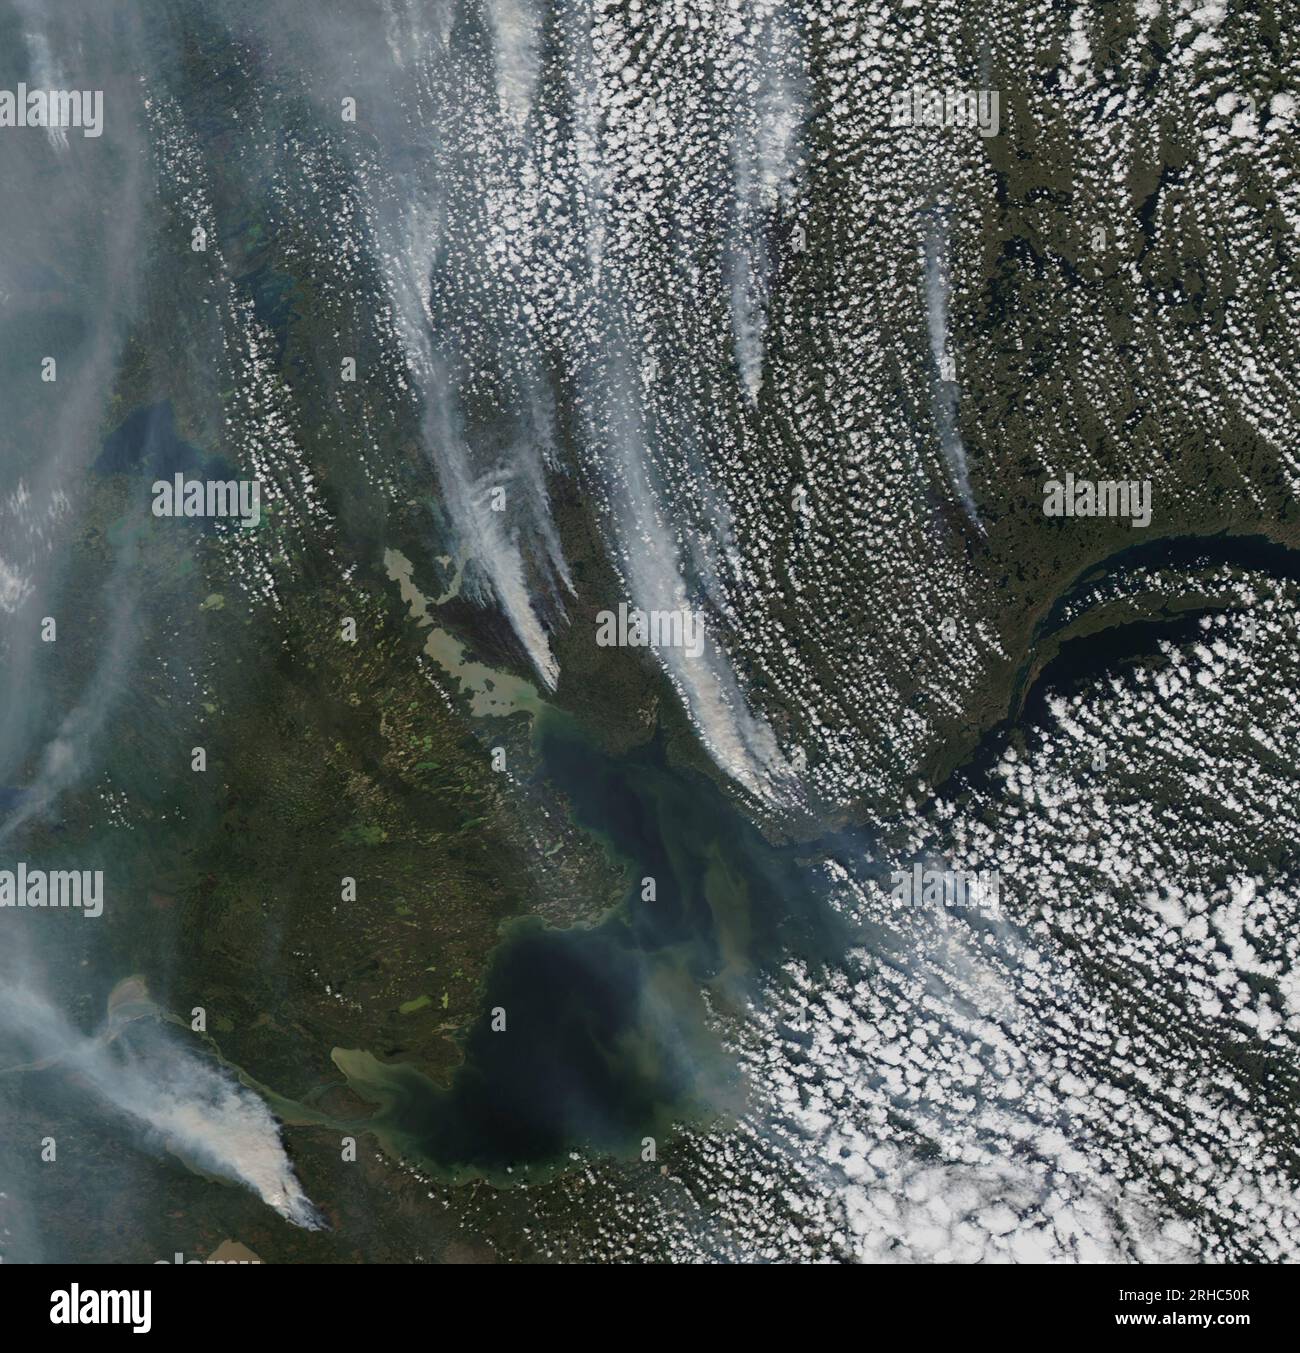 Usa. 8th Aug, 2023. The Moderate Resolution Imaging Spectroradiometer on NASA's Aqua satellite captured this image of dense plumes of smoke streaming from dozens of large fires in the Northwest Territories. Several of these fires raged around Yellowknife, the province's capital and largest city, where firefighters are conducting controlled burns around the city's perimeter as a cautionary measure. These fires follow major outbreaks of fire in Alberta, British Columbia, Nova Scotia, and Quebec, in May, June, and July. Credit: NASA Earth/ZUMA Press Wire/ZUMAPRESS.com/Alamy Live News Stock Photo